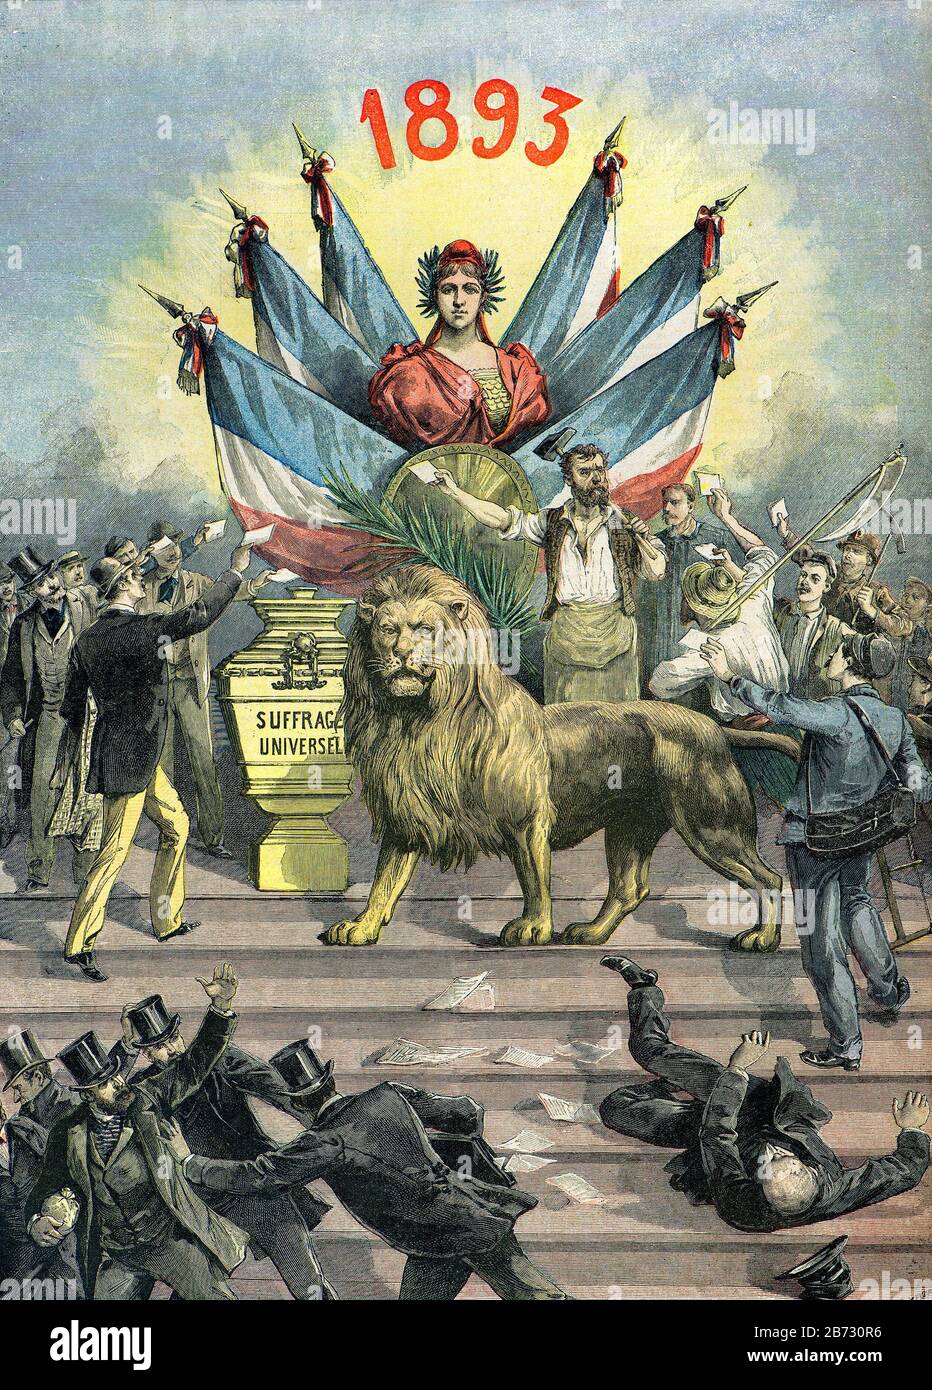 Engraving - Allegory of universal suffrage in 1893 - Private collection Stock Photo